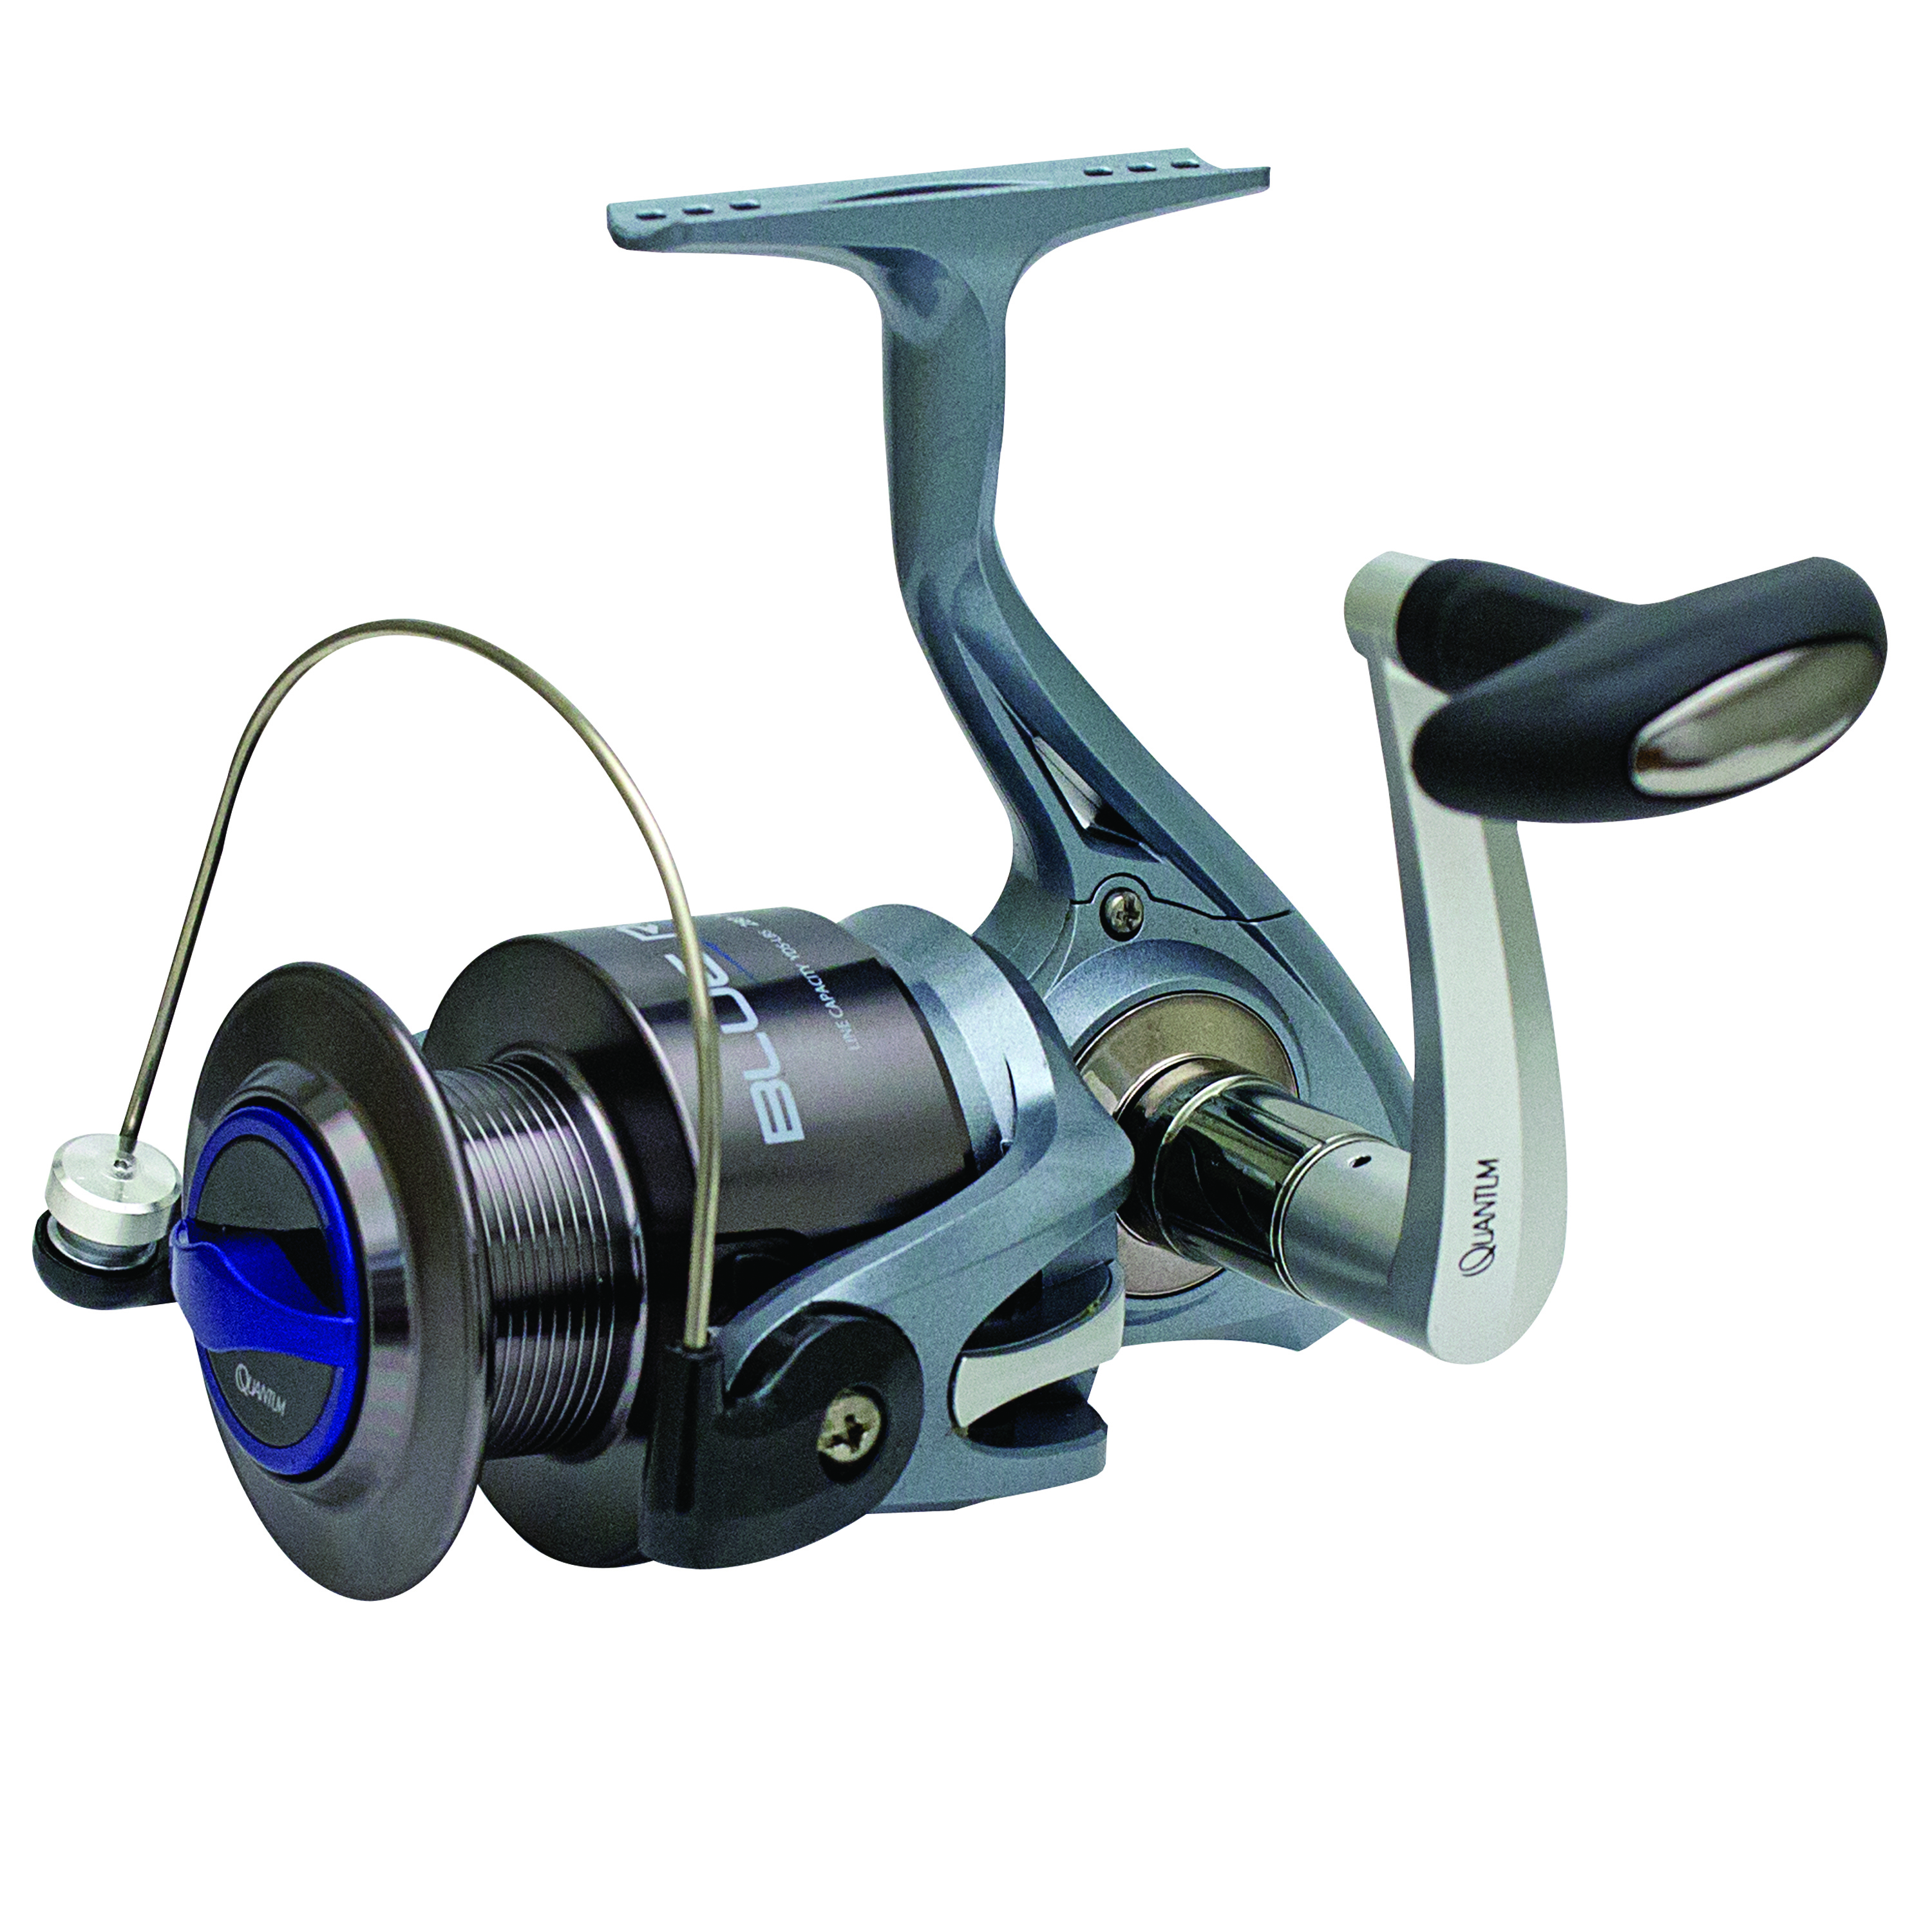 Quantum Blue Runner 12 ft MH Saltwater Spinning Rod and Reel Combo